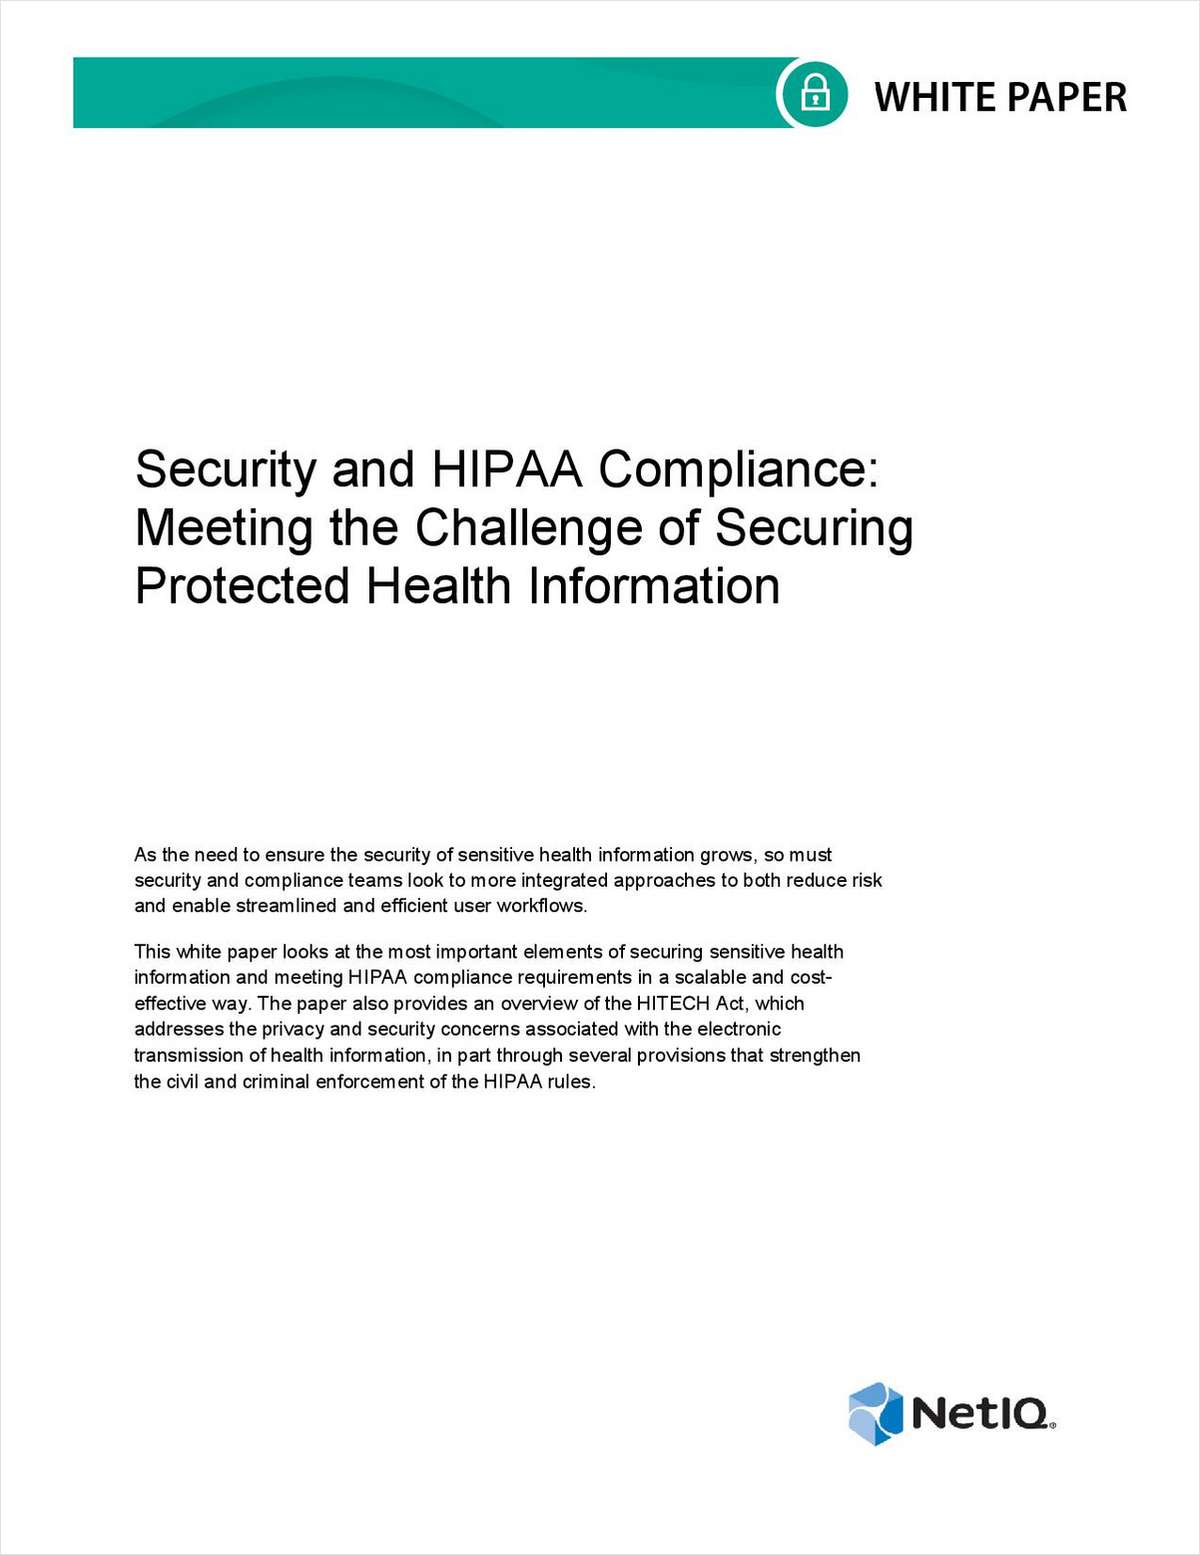 Security and HIPAA Compliance: Meeting the Challenge of Securing Protected Health Information